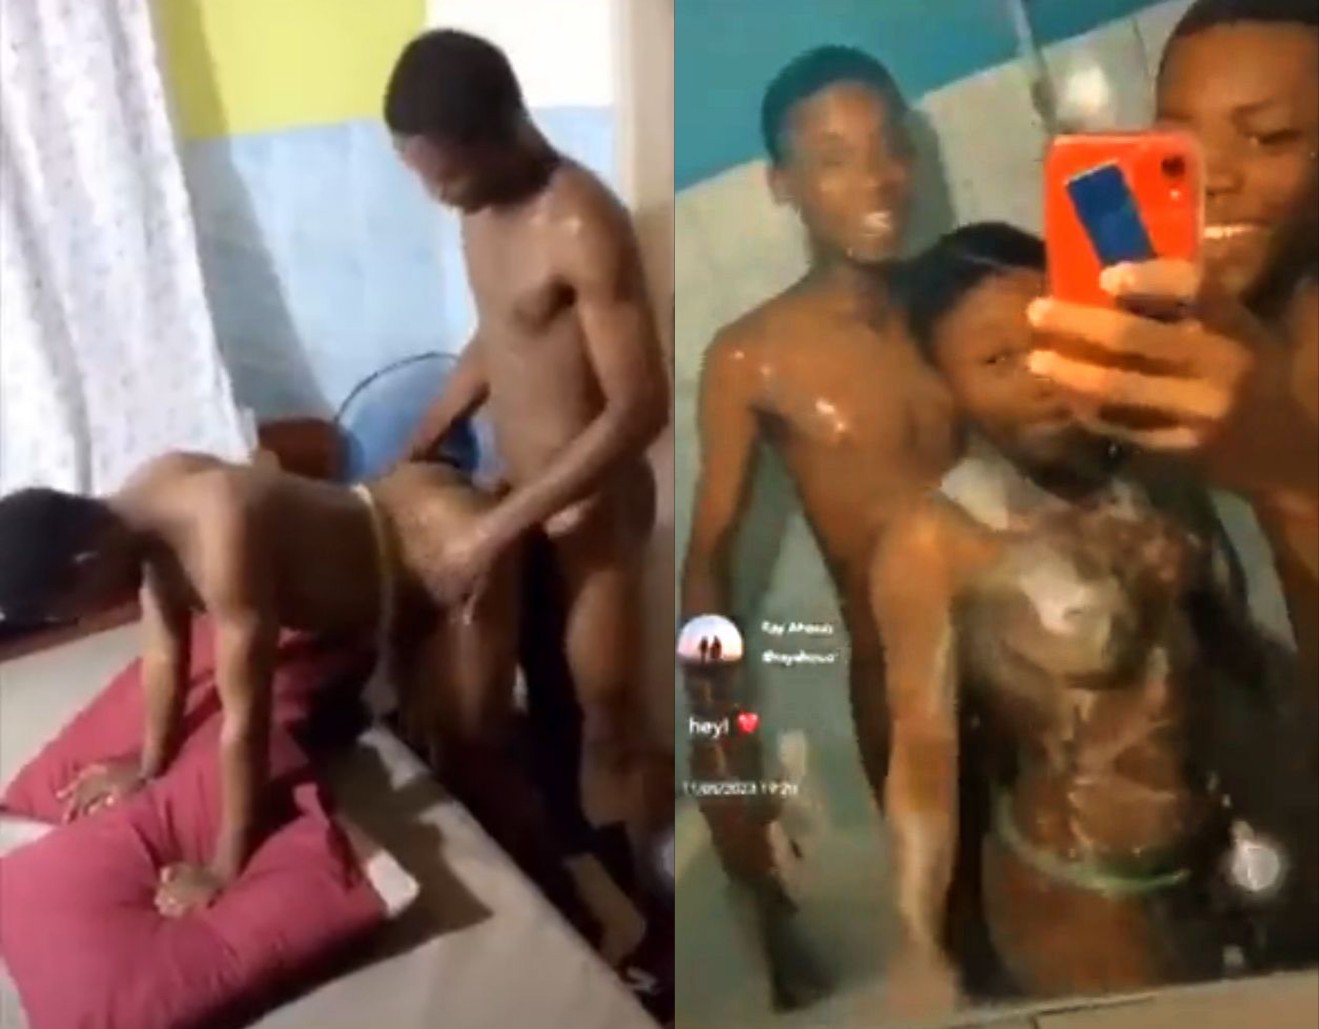 Doggy Style Sex Tape And Nudes Of Ghana SHS Student Leaked (18+) - Wow News...